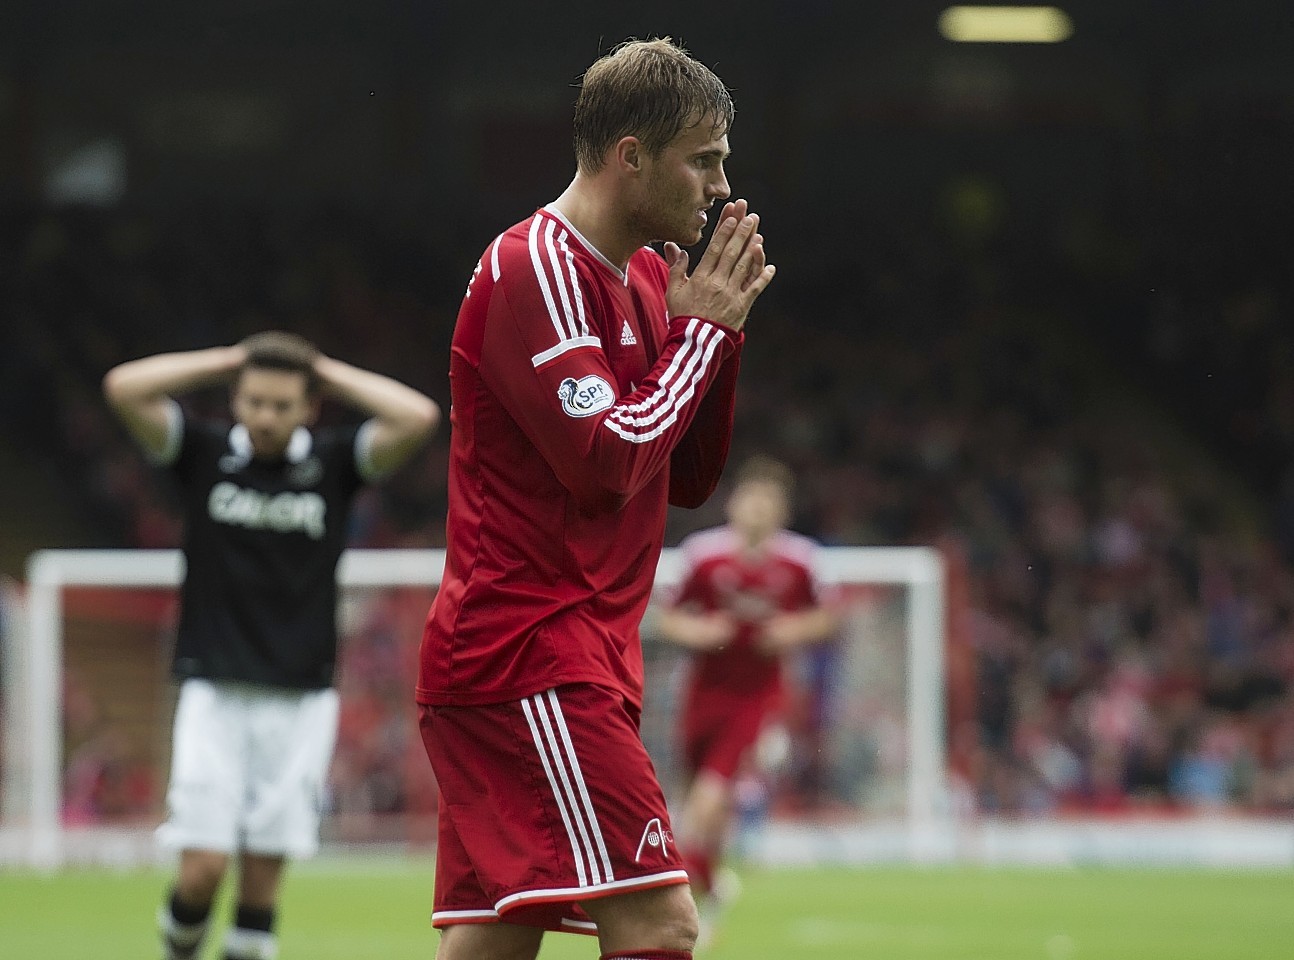 David Goodwillie couldn't find any sort of break through for the Dons